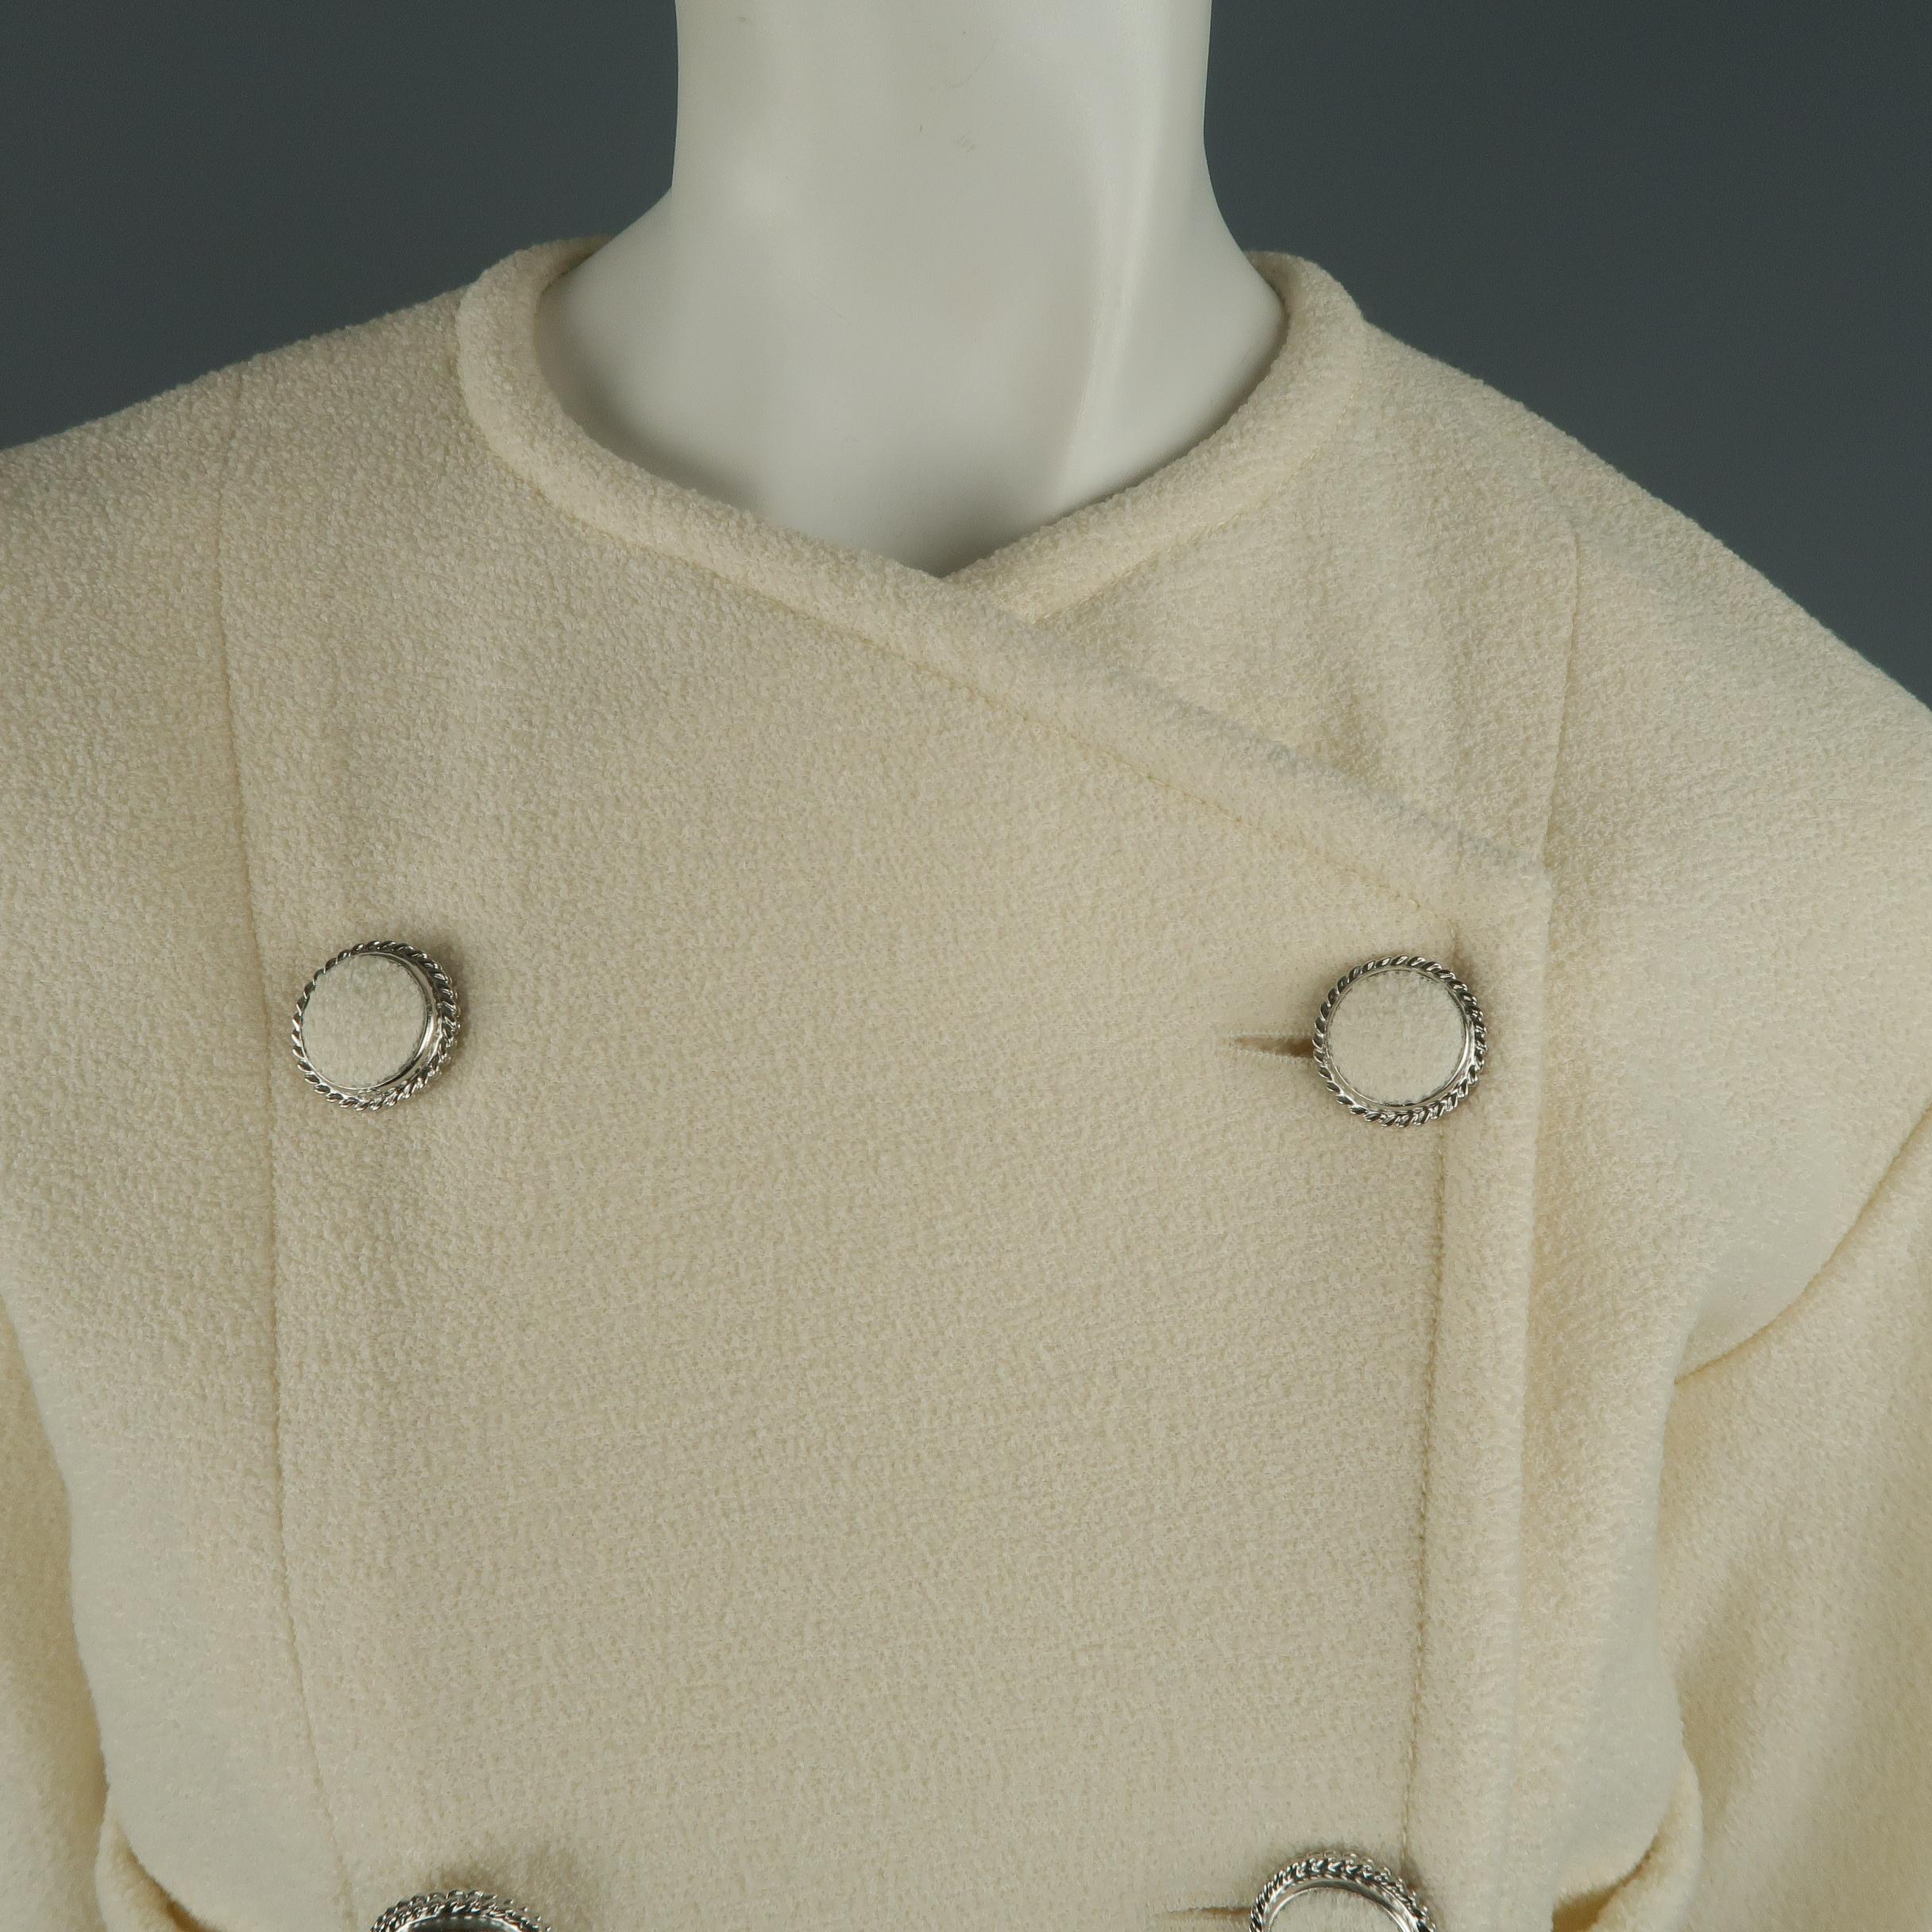 Chanel jacket comes in ivory cream wool tweed with a double breasted front, silver tone metal fabric buttons, cropped sleeves and length, and patch pockets. Matching pants available separately. Made in France.
 
Excellent Pre-Owned